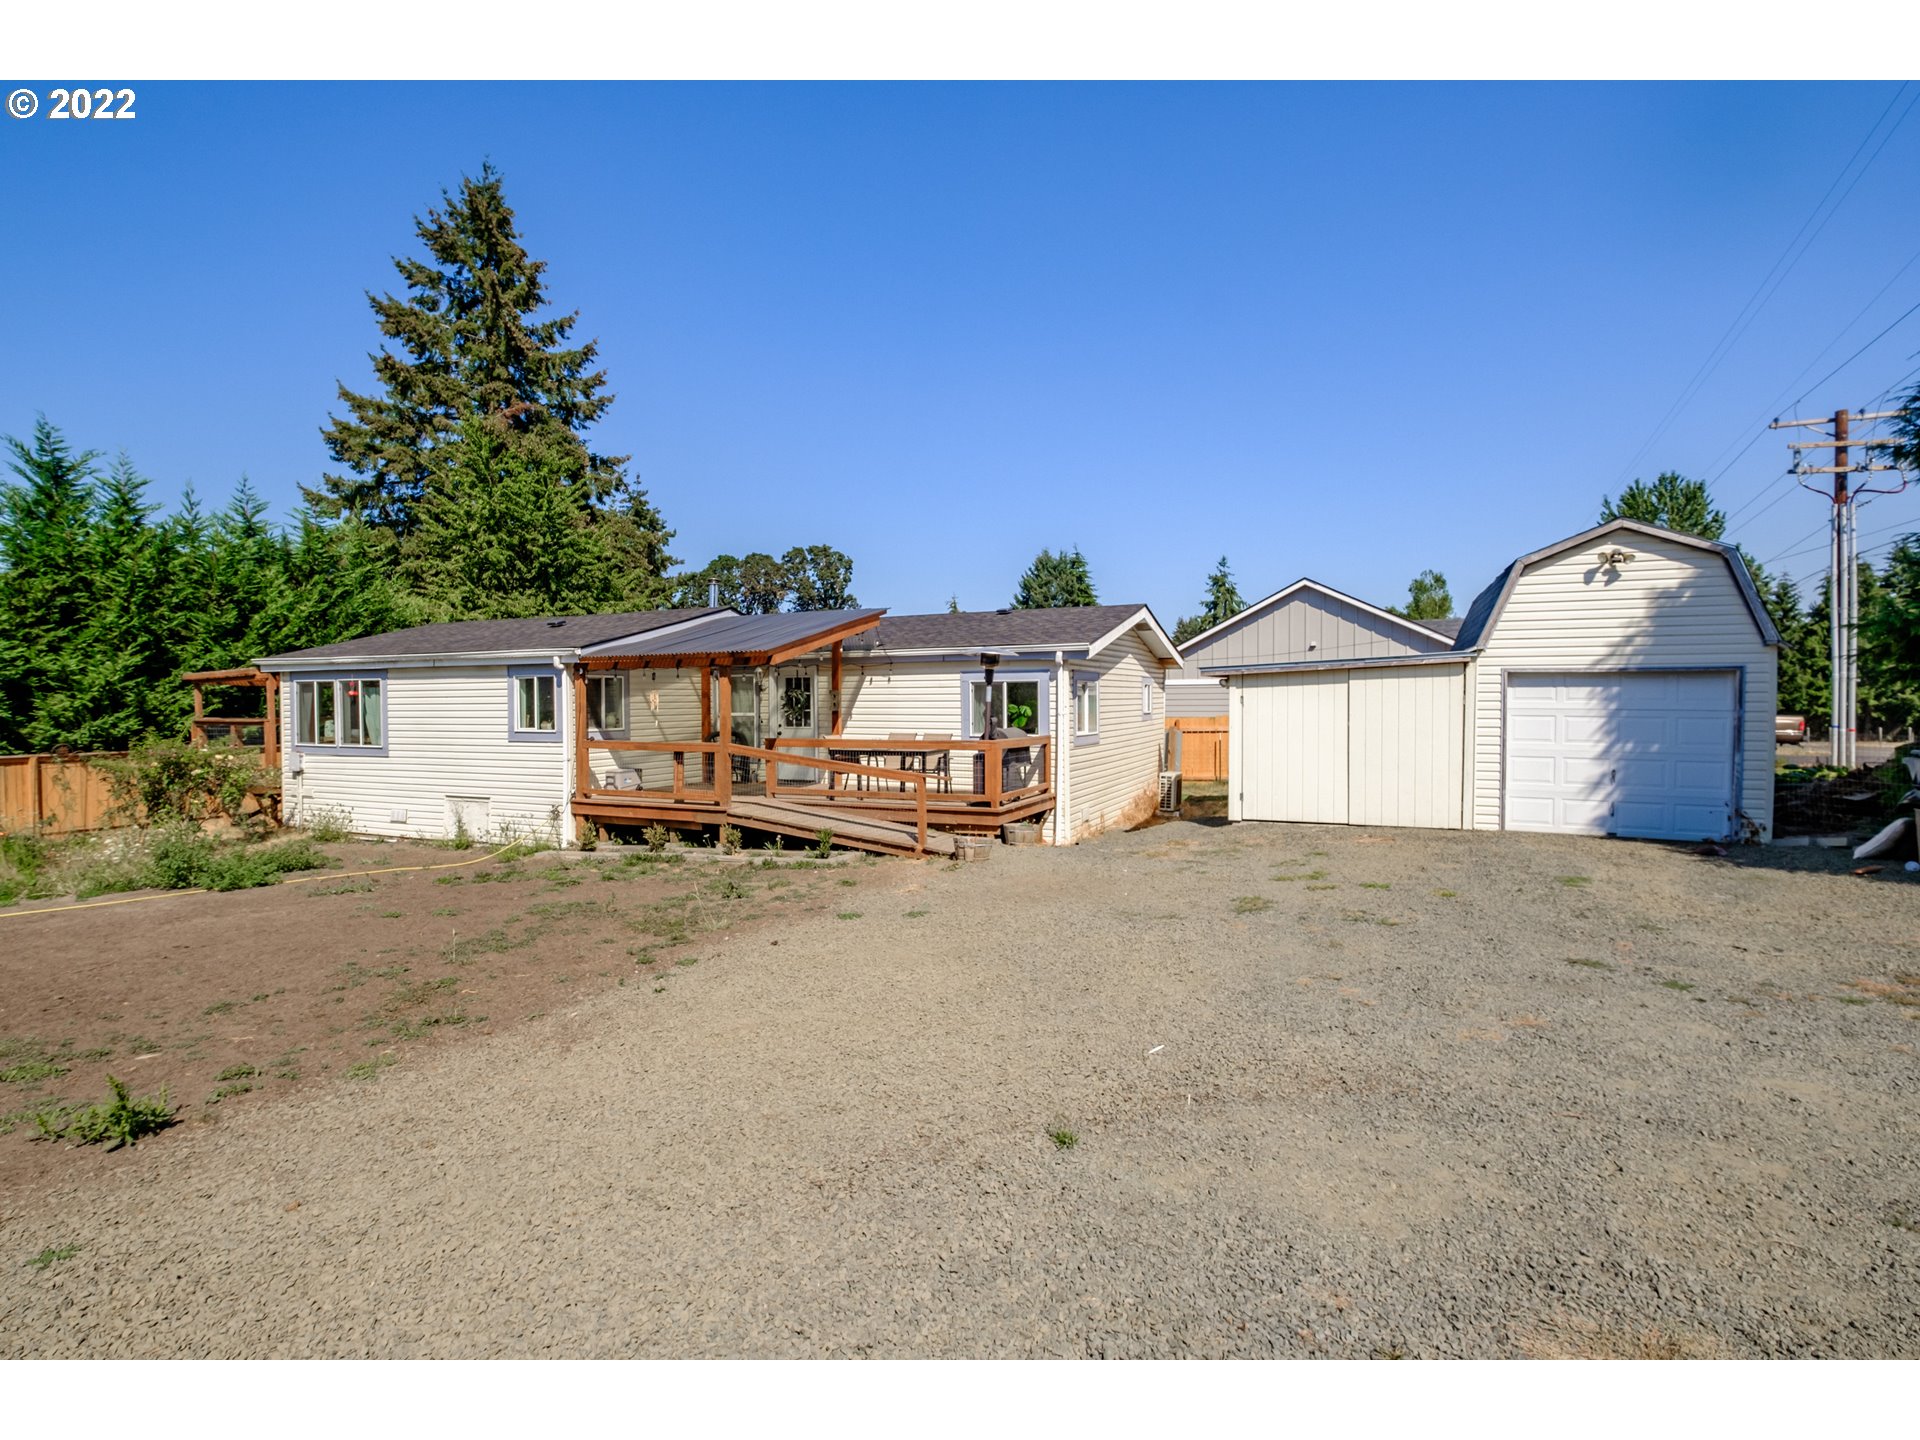 90886 ALVADORE RD, Junction City, OR 